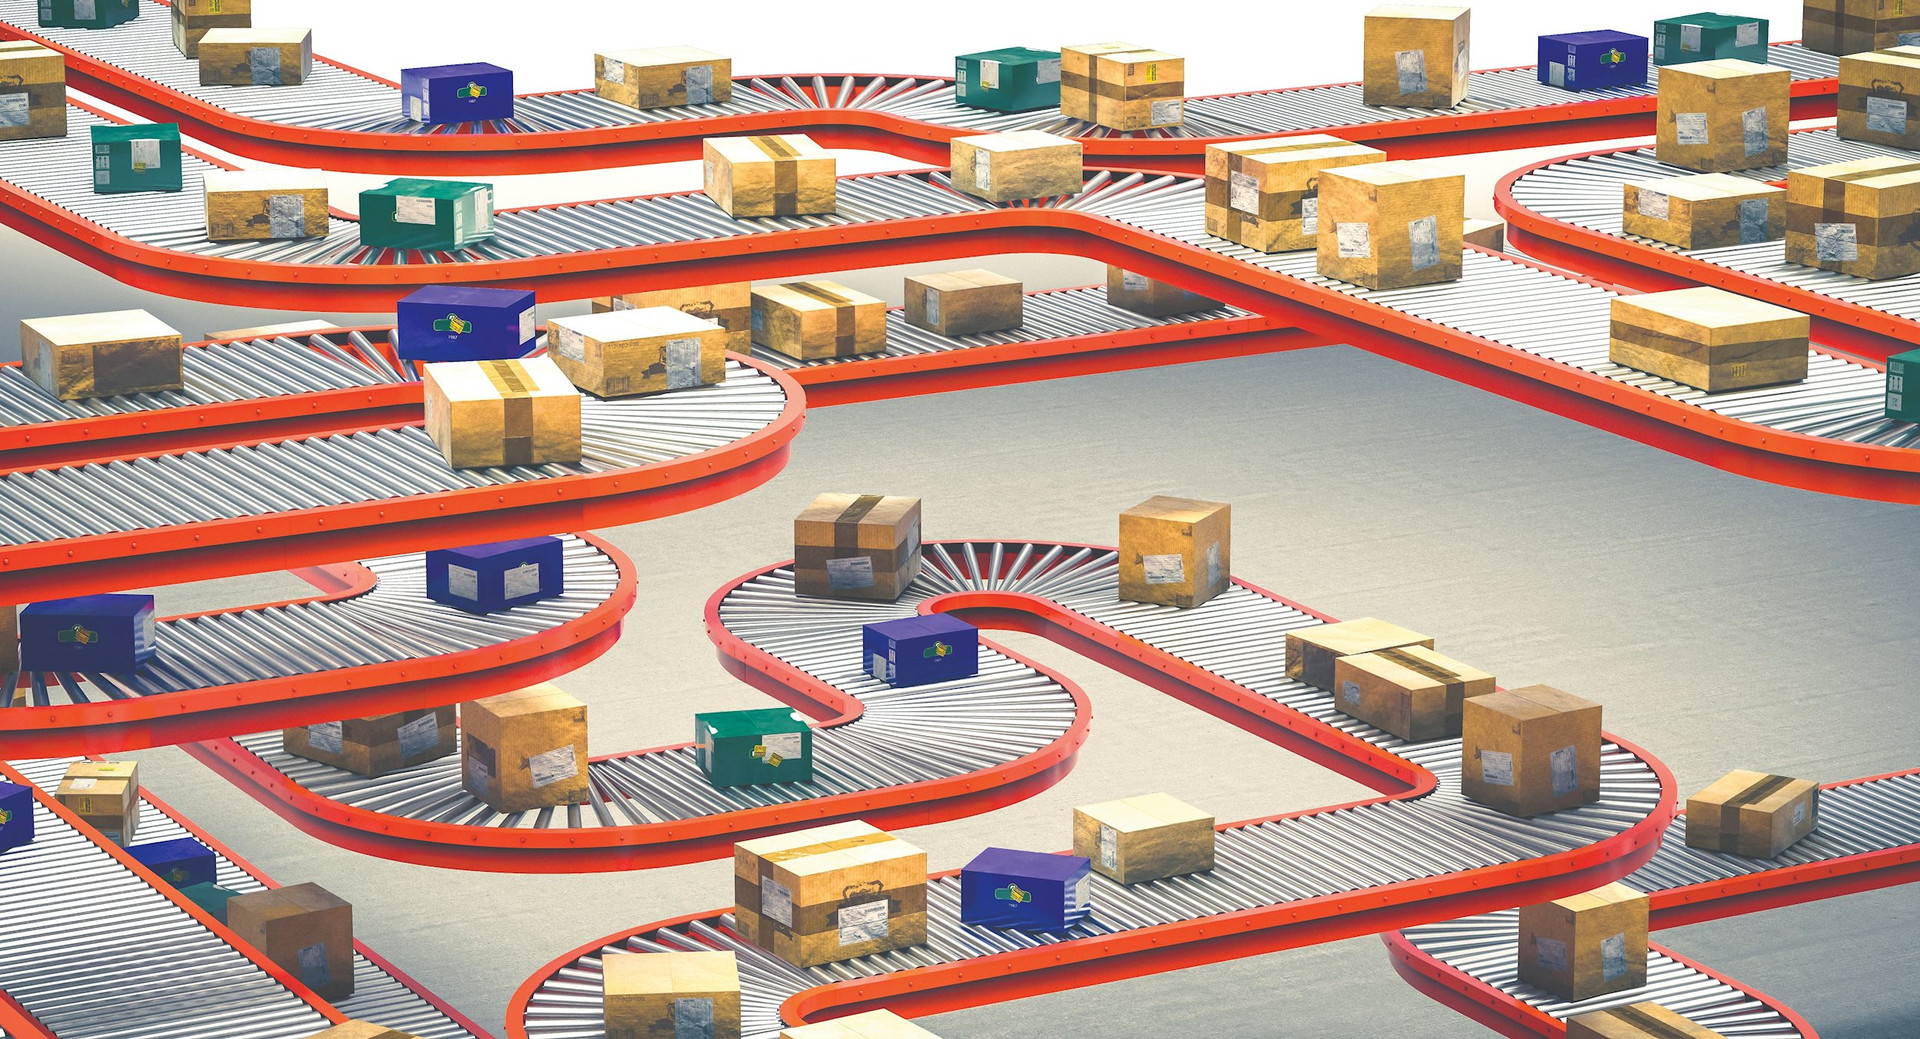 detail-network-conveyor-rollers-with-parcels-inside-warehouse-compressed.jpeg